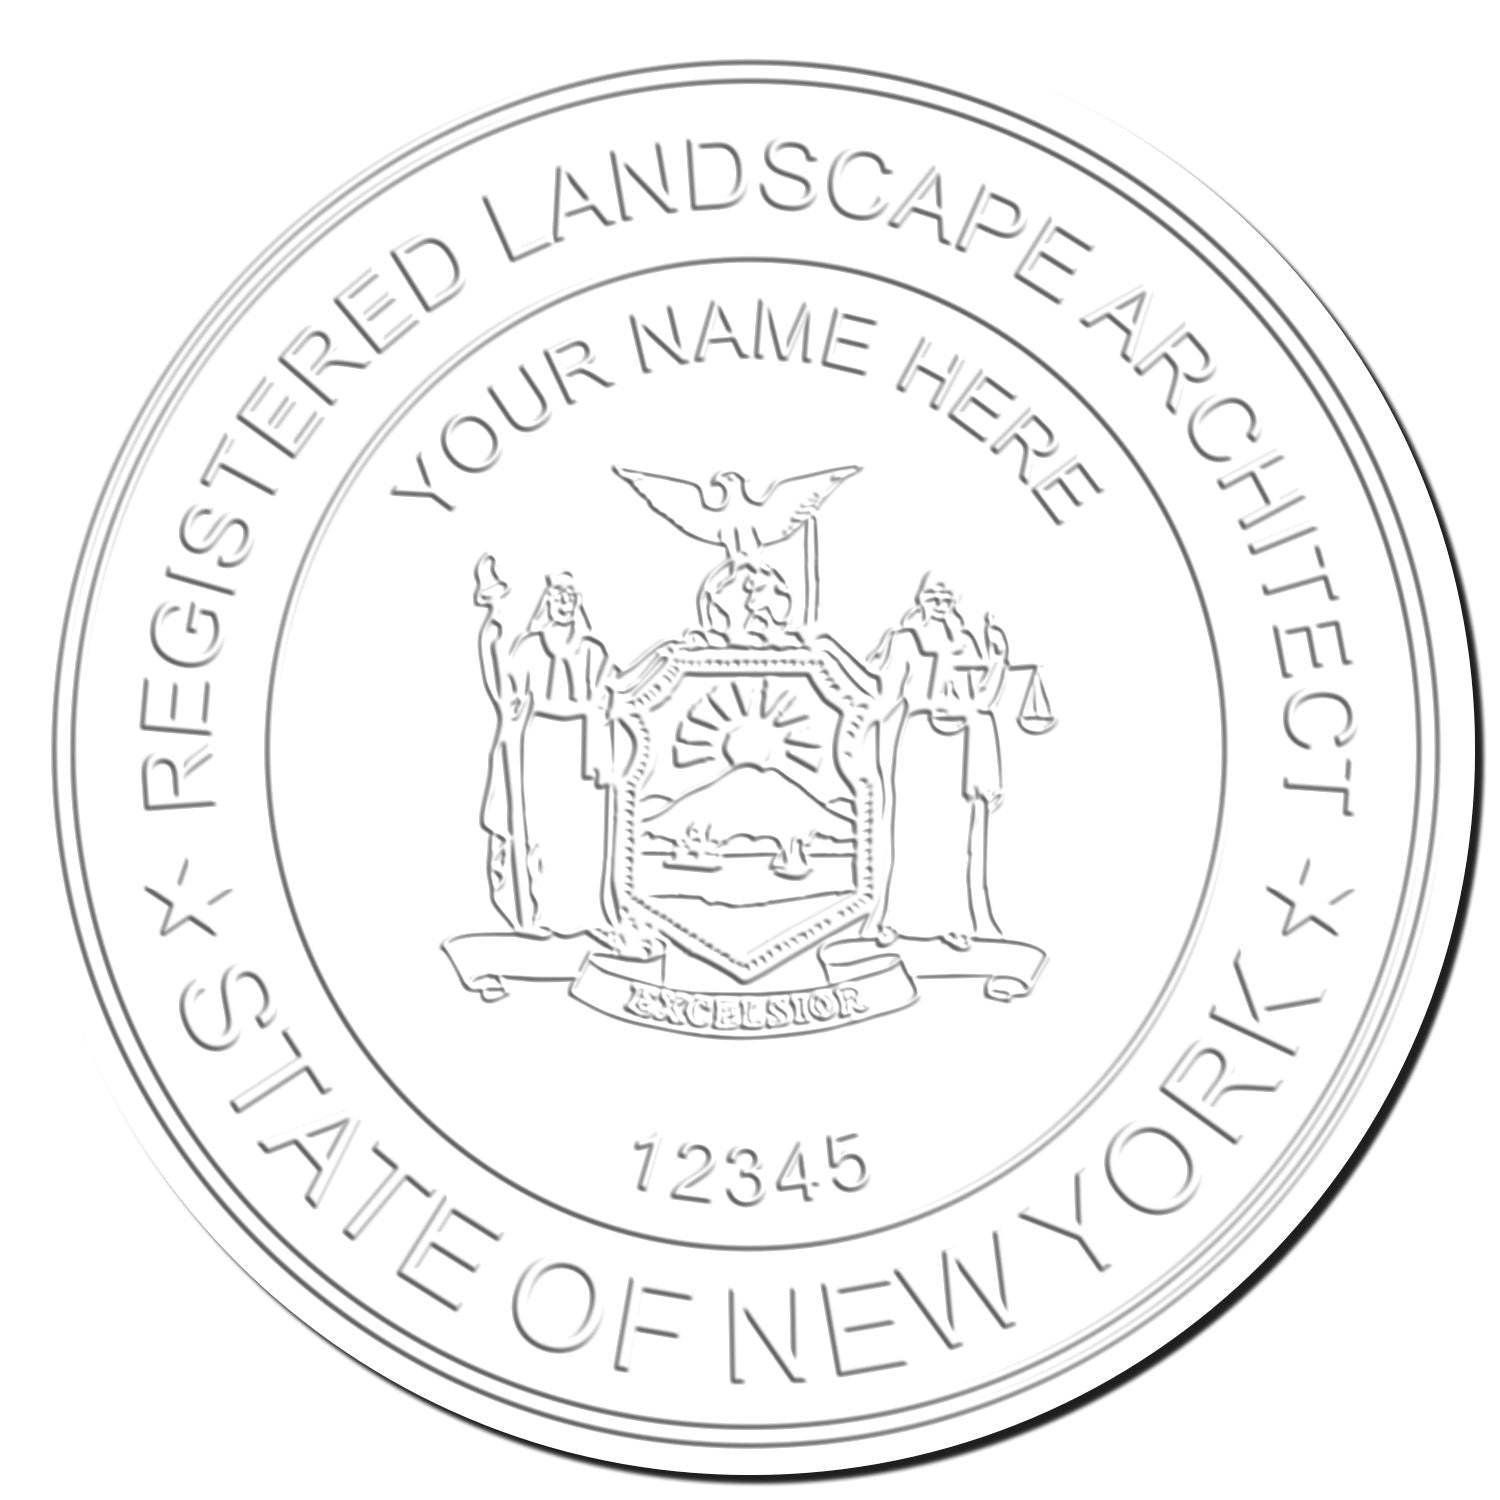 This paper is stamped with a sample imprint of the New York Long Reach Landscape Architect Embossing Stamp, signifying its quality and reliability.